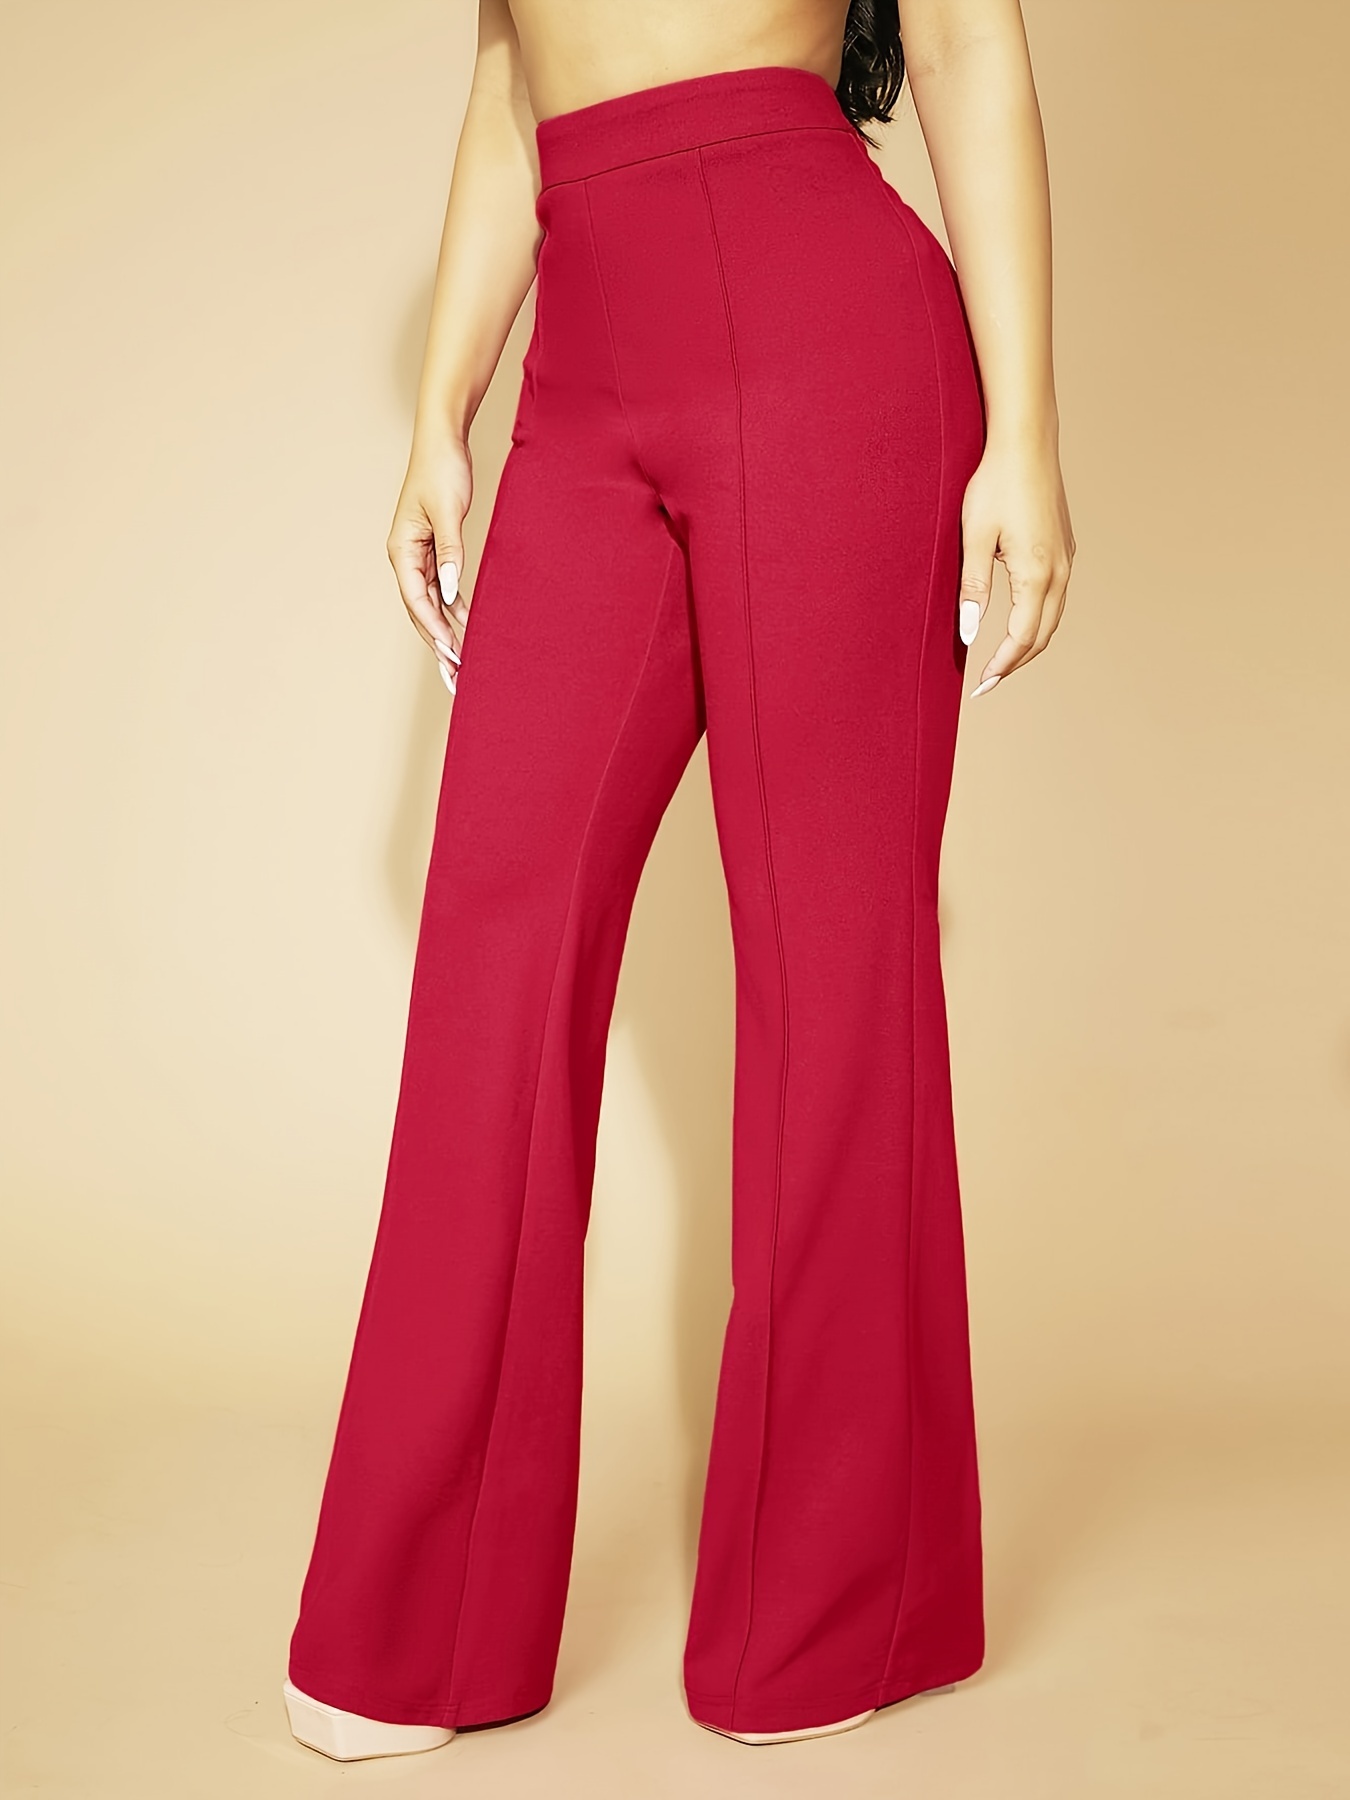 Plus Size Elegant Pants Women's Plus Solid High Waisted High